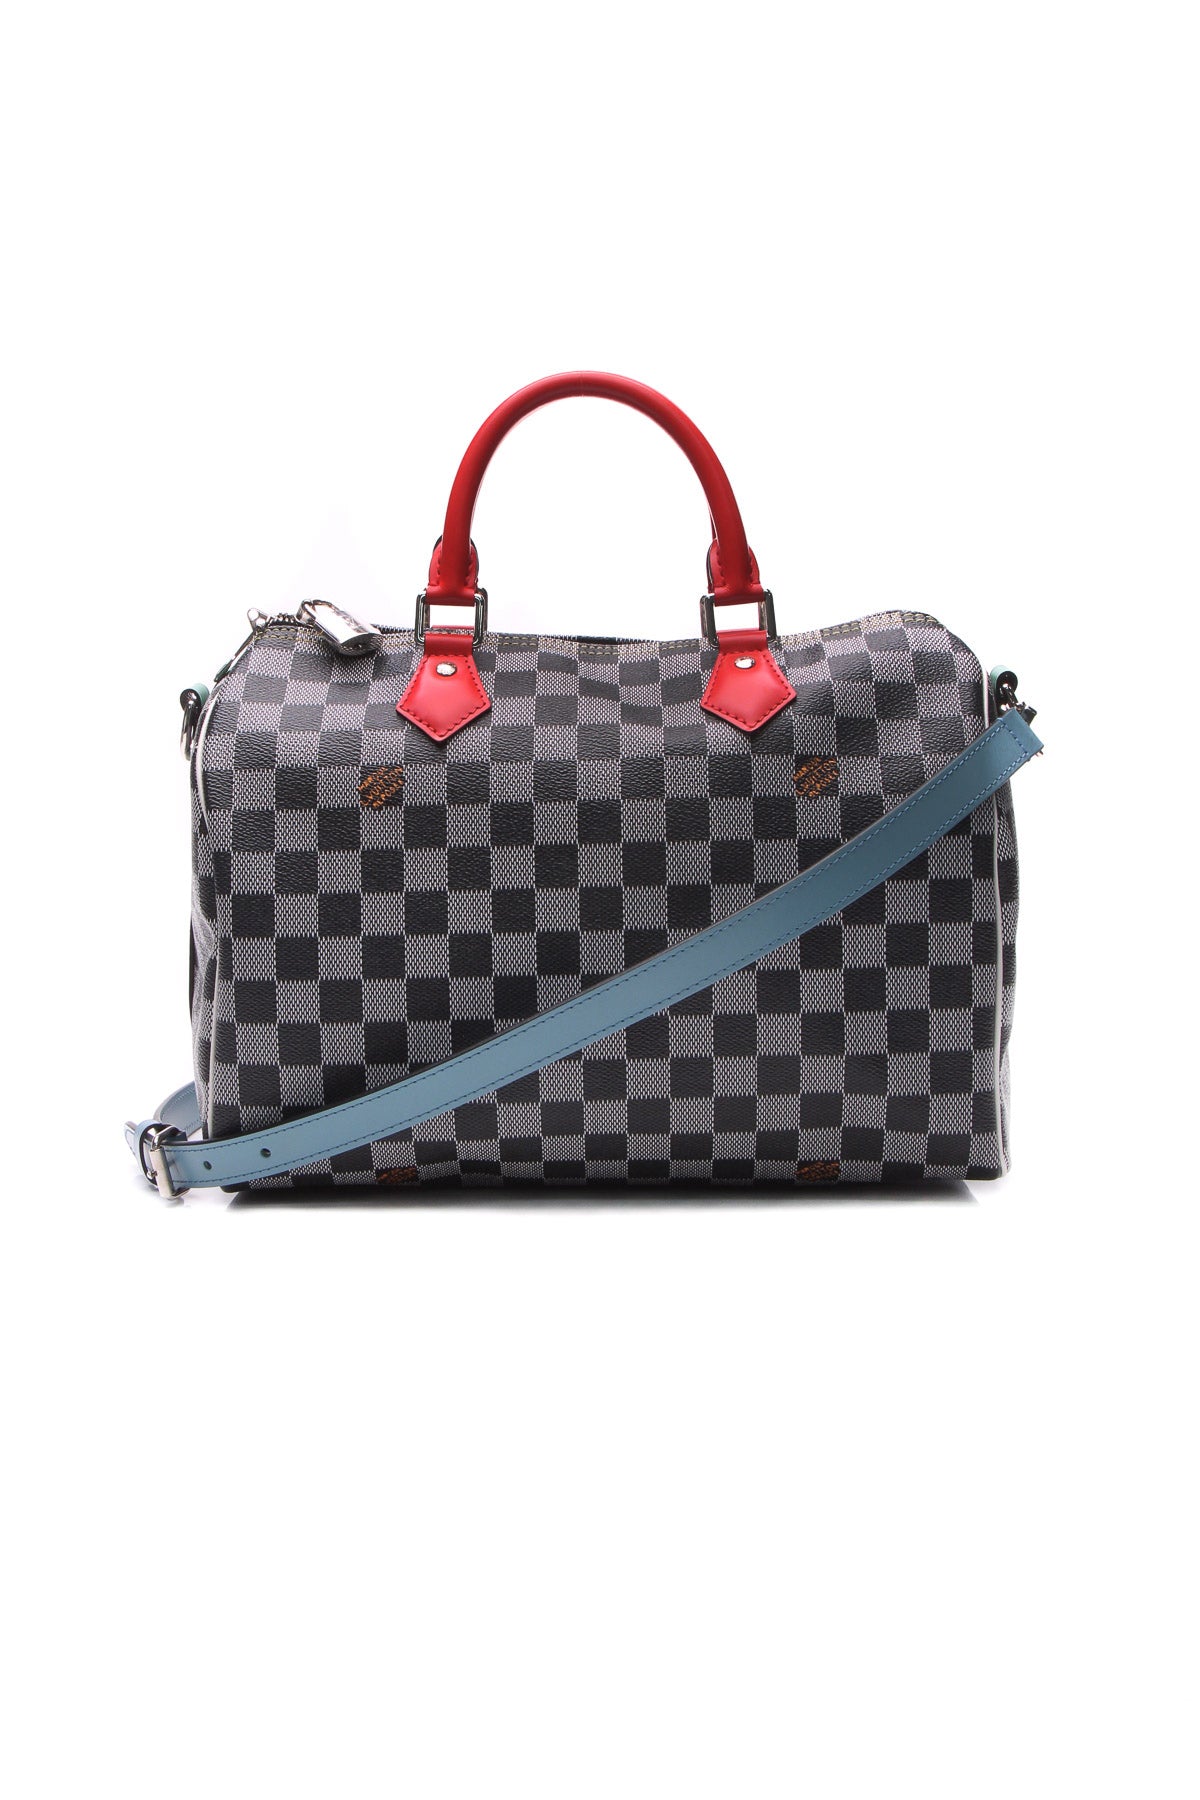 Louis Vuitton Speedy Bags Tagged Tradesy-Unpublished - Couture USA